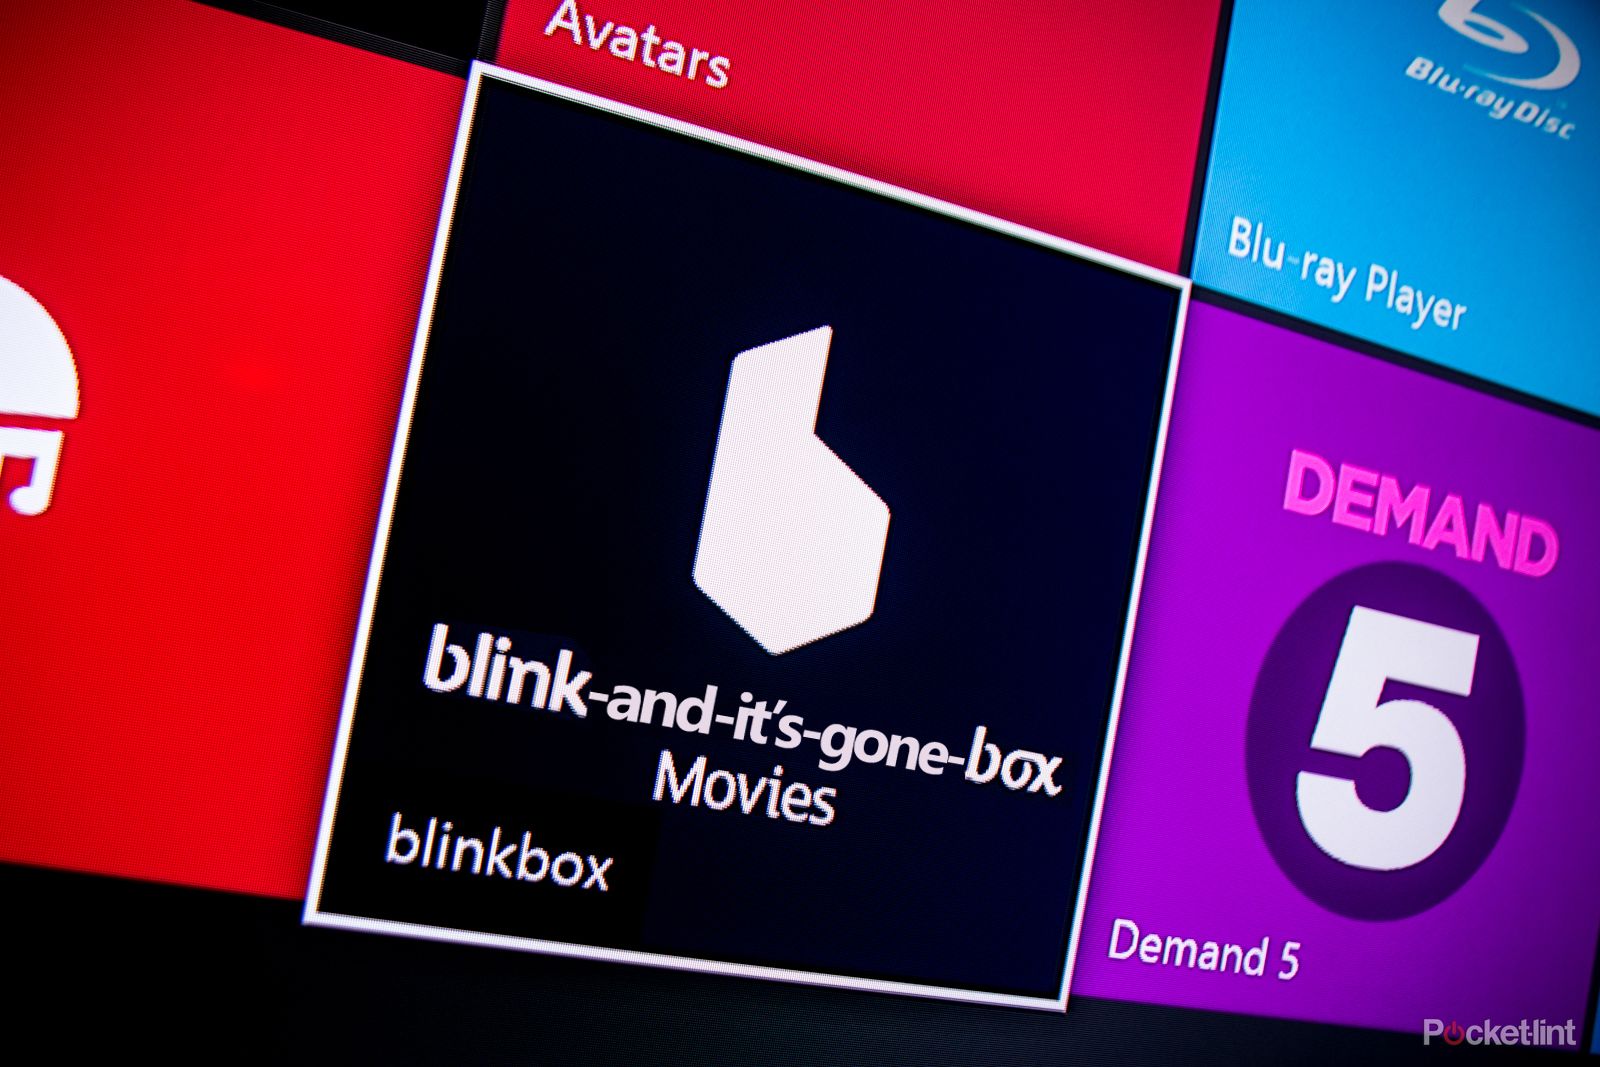 blinkbox name to be ditched talktalk to take on netflix under own brand image 1